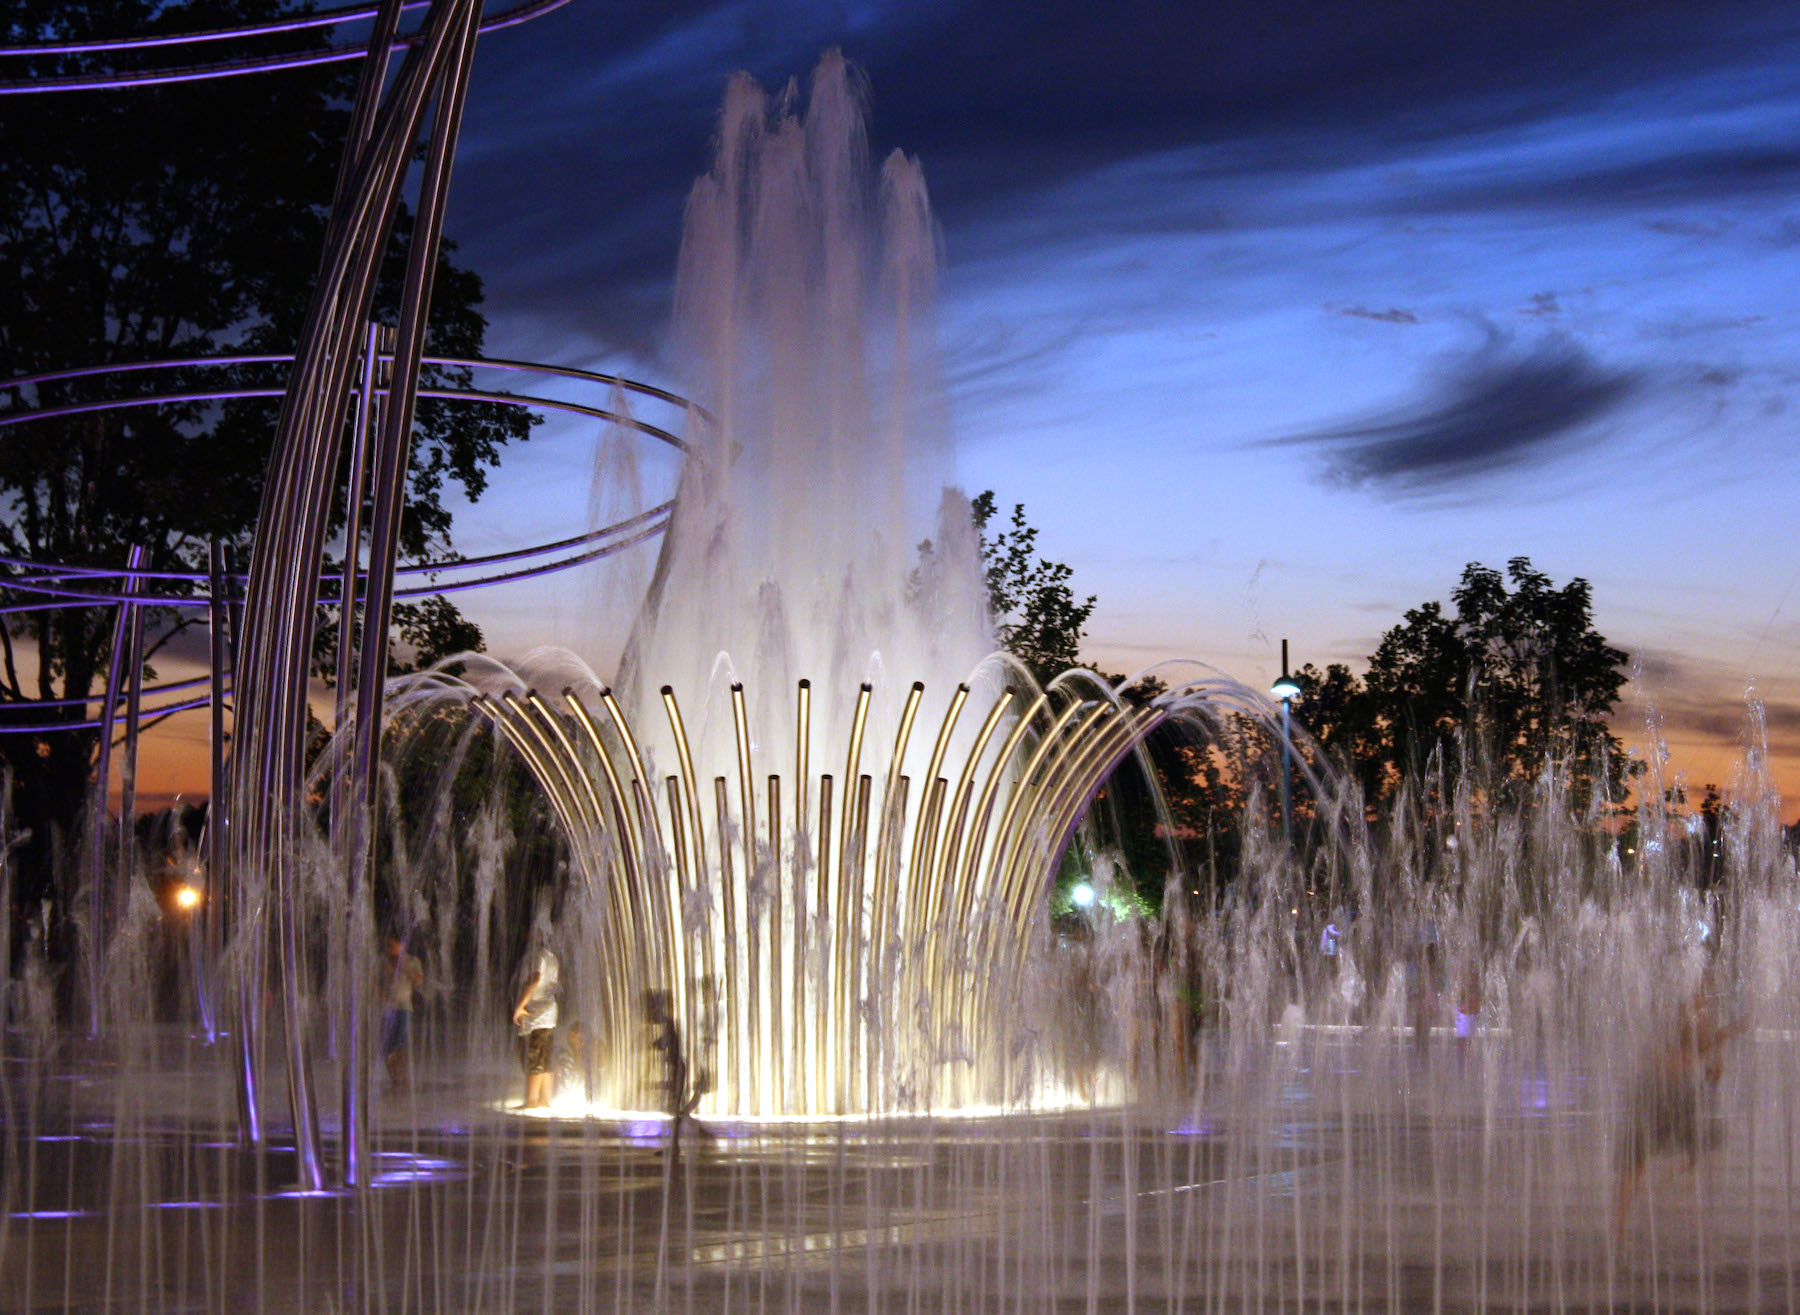 World's best fountains: 15 of the most spectacular | CNN Travel